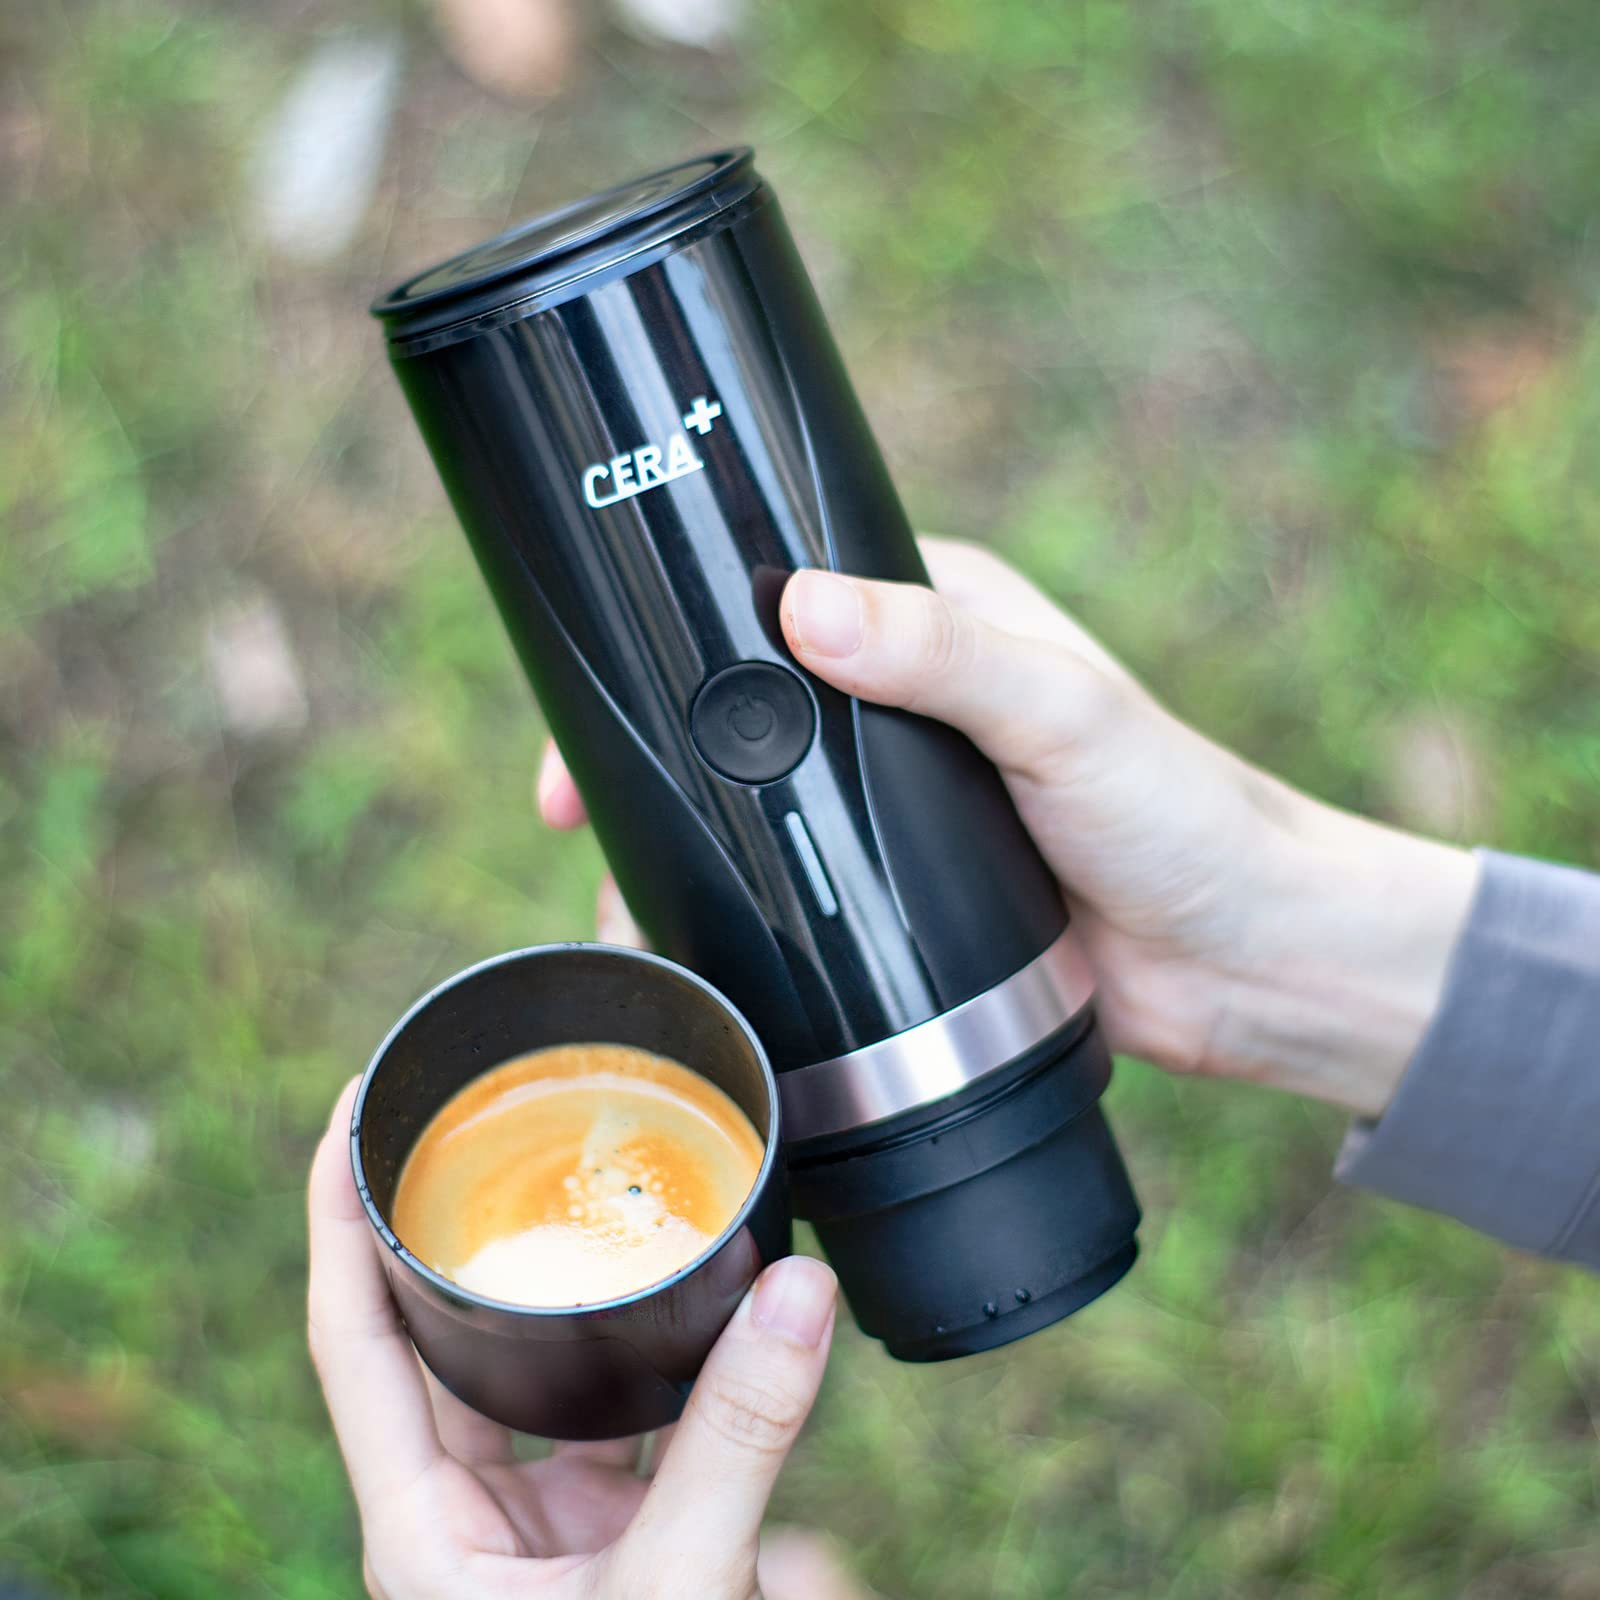 https://neso-pro.com/cdn/shop/products/PortableCoffeeMakerforTravel_3-4minsSelf-Heating20BarRechargeableMiniCampingEspressoMachine_CompatiblewithNSPods_GroundCoffeeforHome_Office_OutdoorCampaignwithCarryingCasebyNeso-Pro2.png?v=1659748982&width=1946